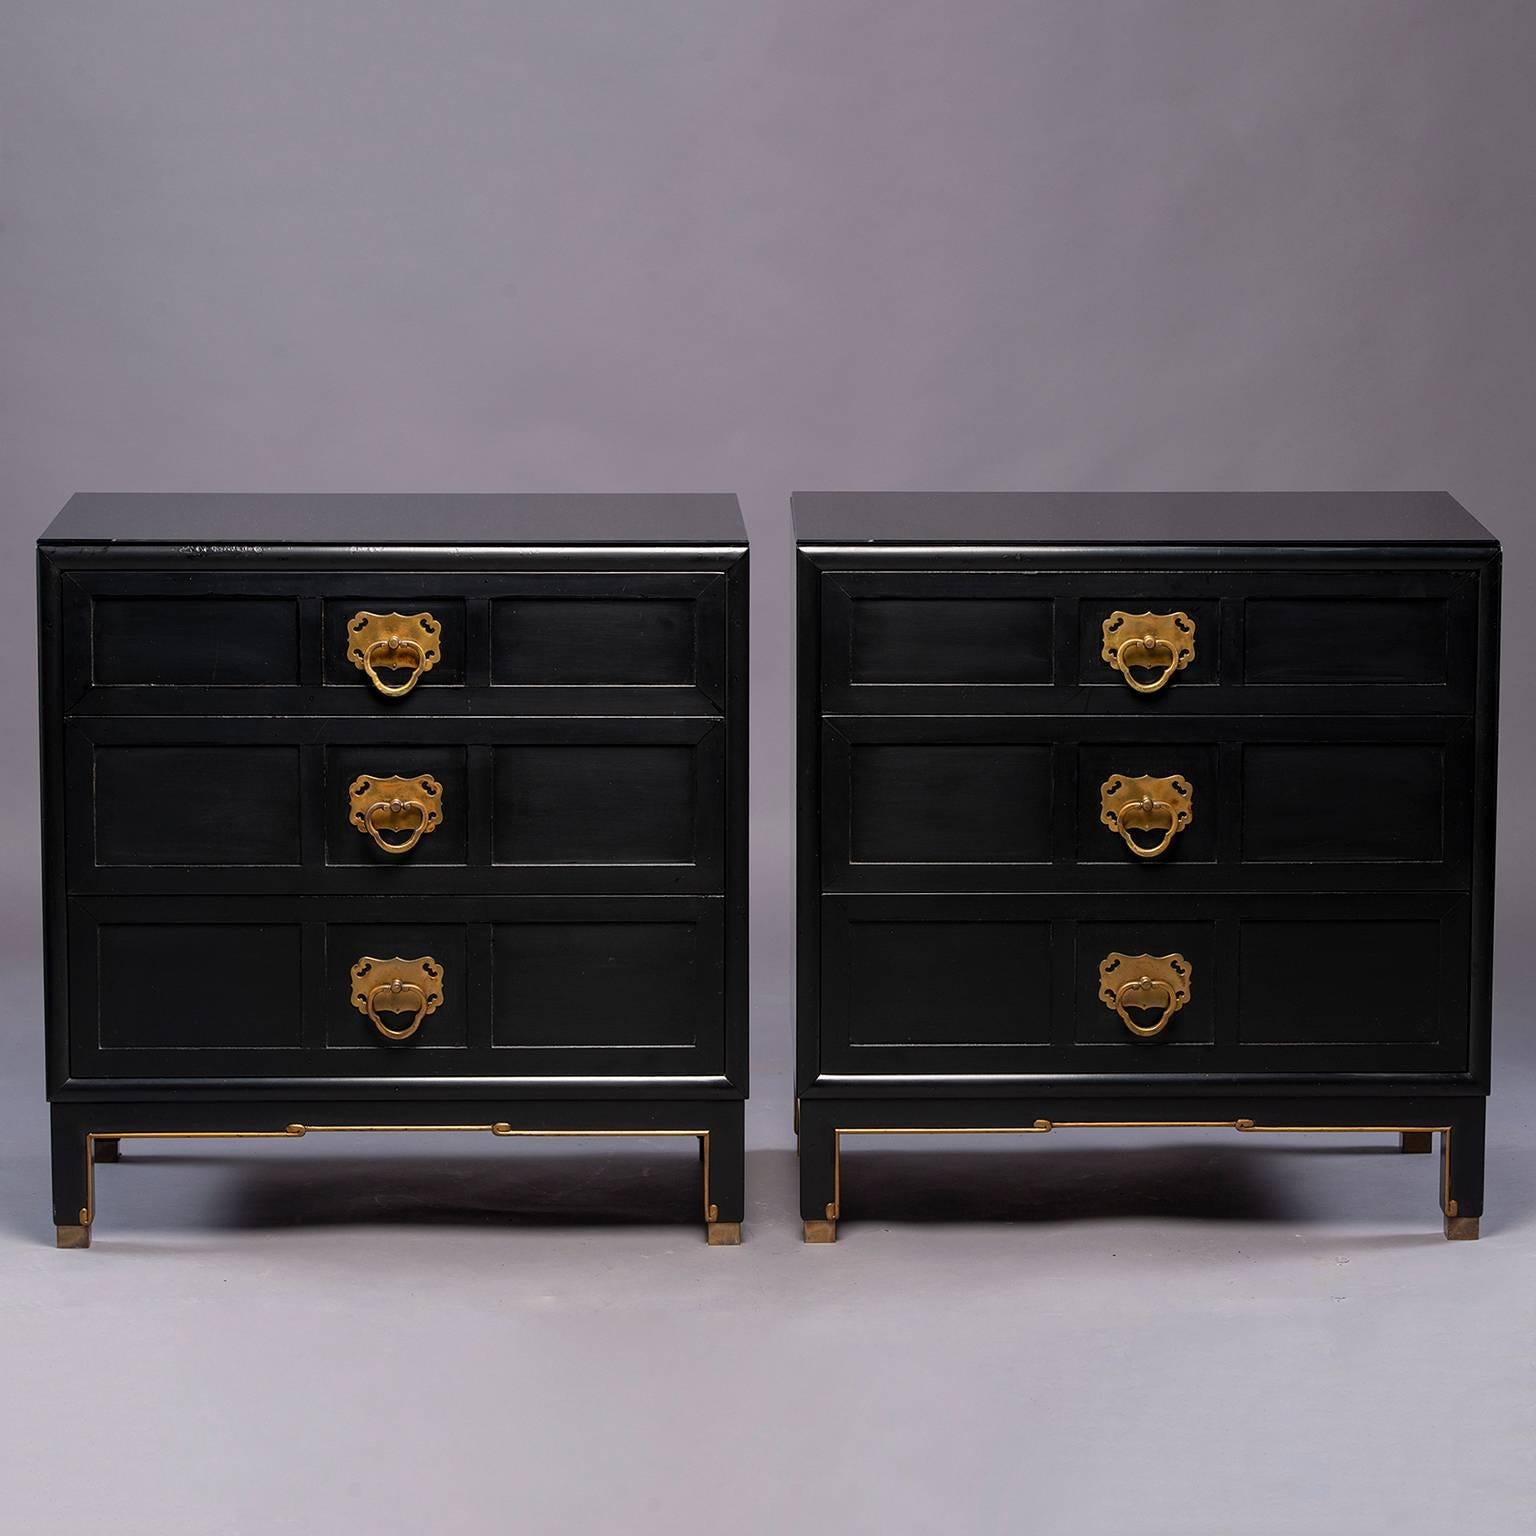 Pair of three drawer Asian style ebonized chests with black lacquer finish, gilded details, brass foot caps and brass hardware, circa early 1950s. Finish on chests has been professionally touched up and custom cut glass tops have been added for